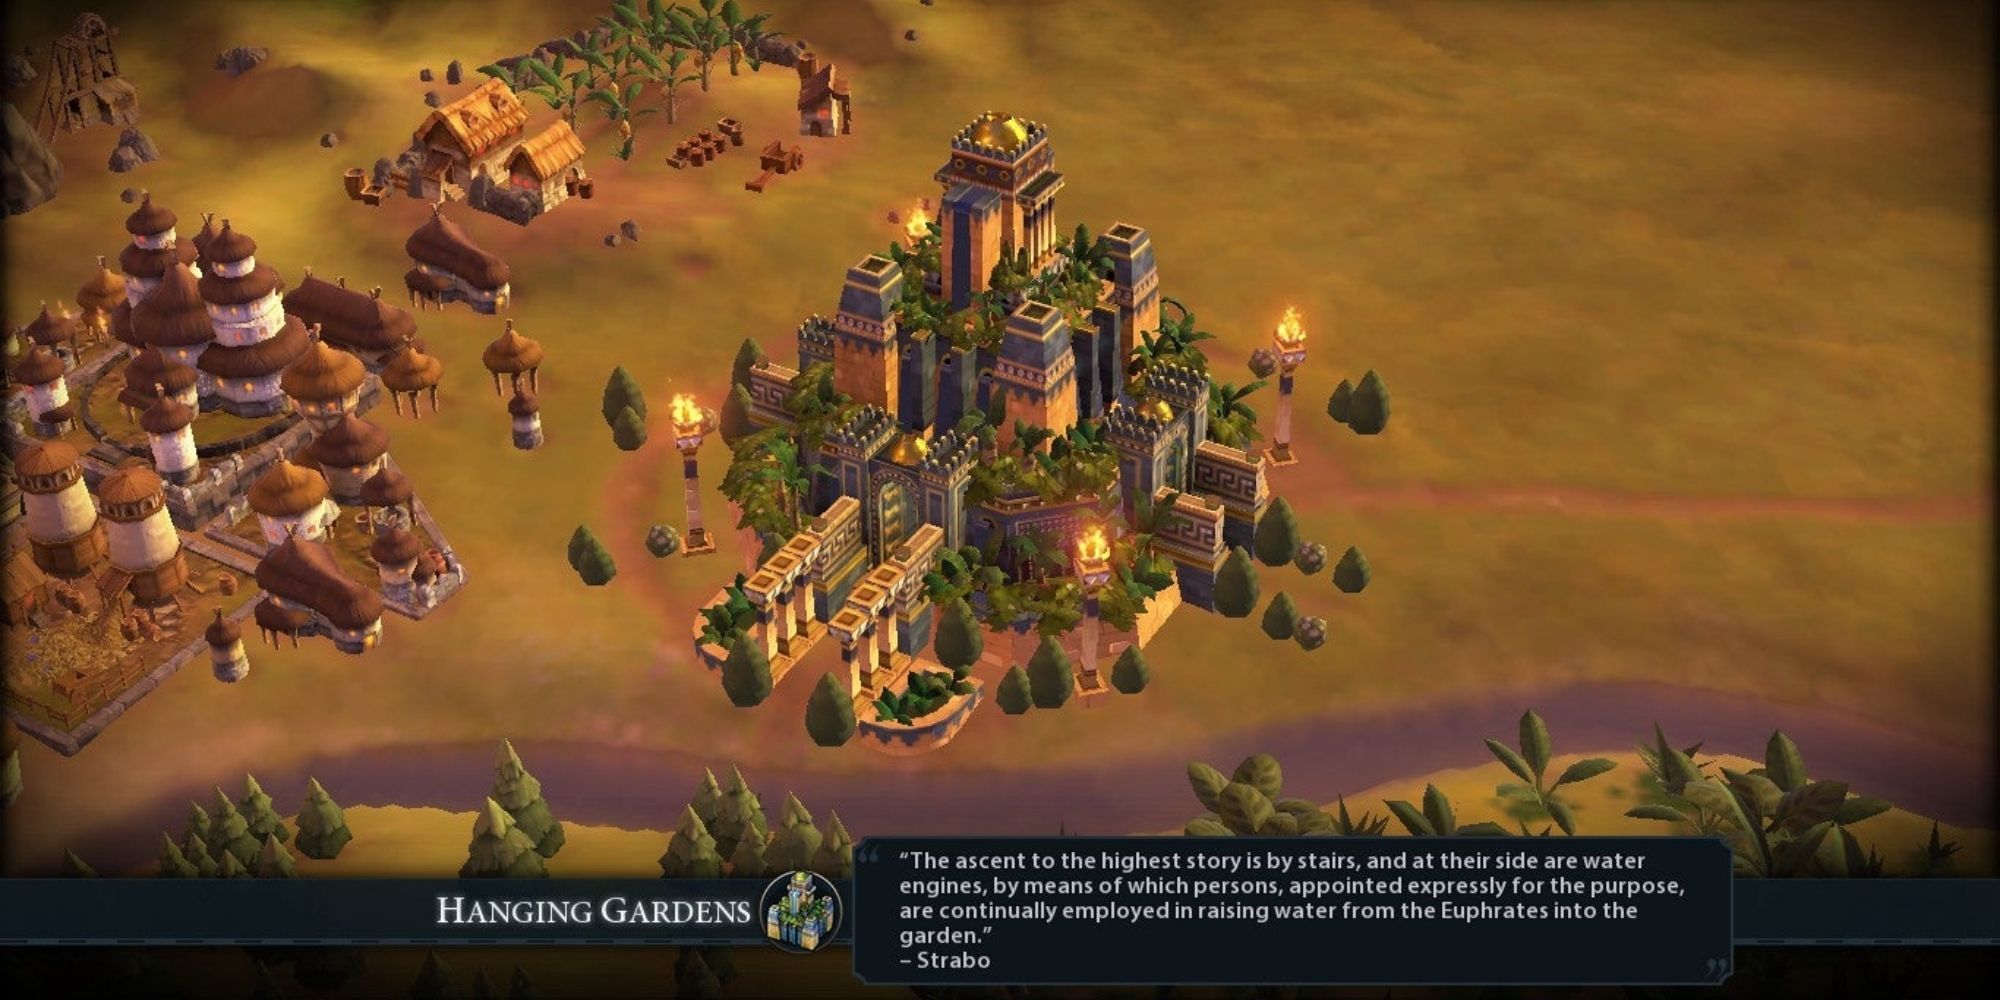 The hanging gardens as seen in Civilization 6